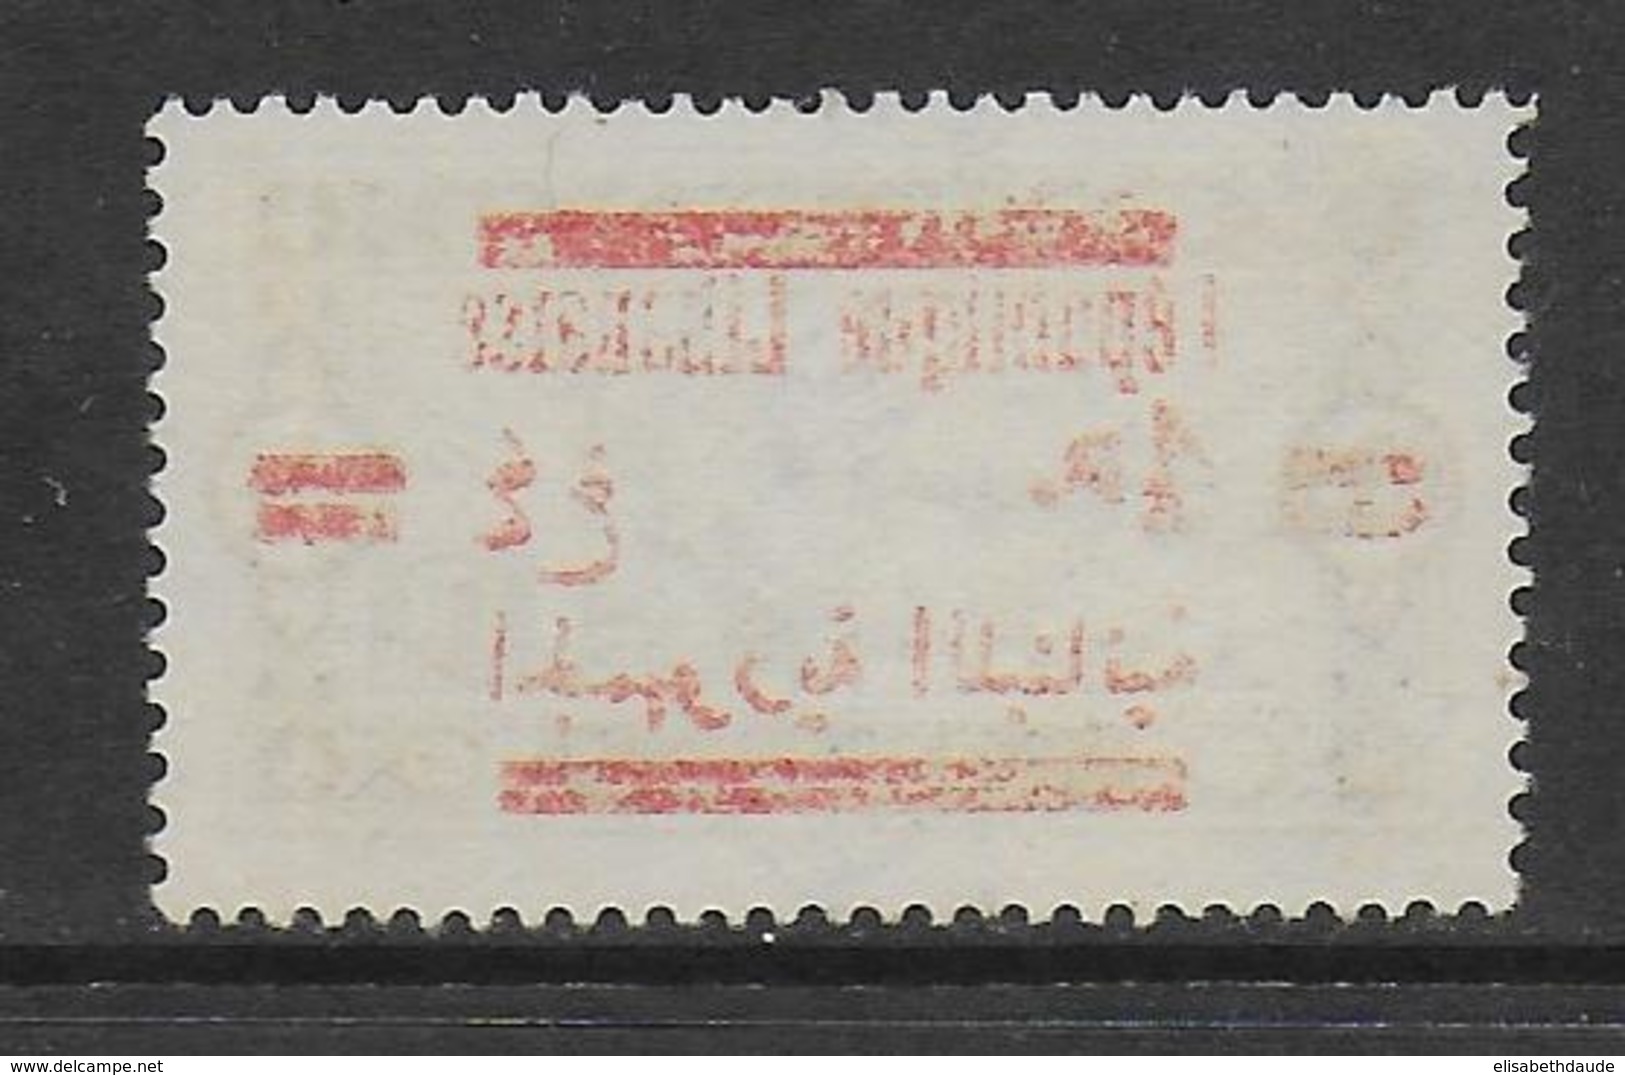 GRAND-LIBAN - 1928 - YVERT N°119 SURCHARGE RECTO-VERSO OBLITERE - COTE = 80 EUR. - Used Stamps